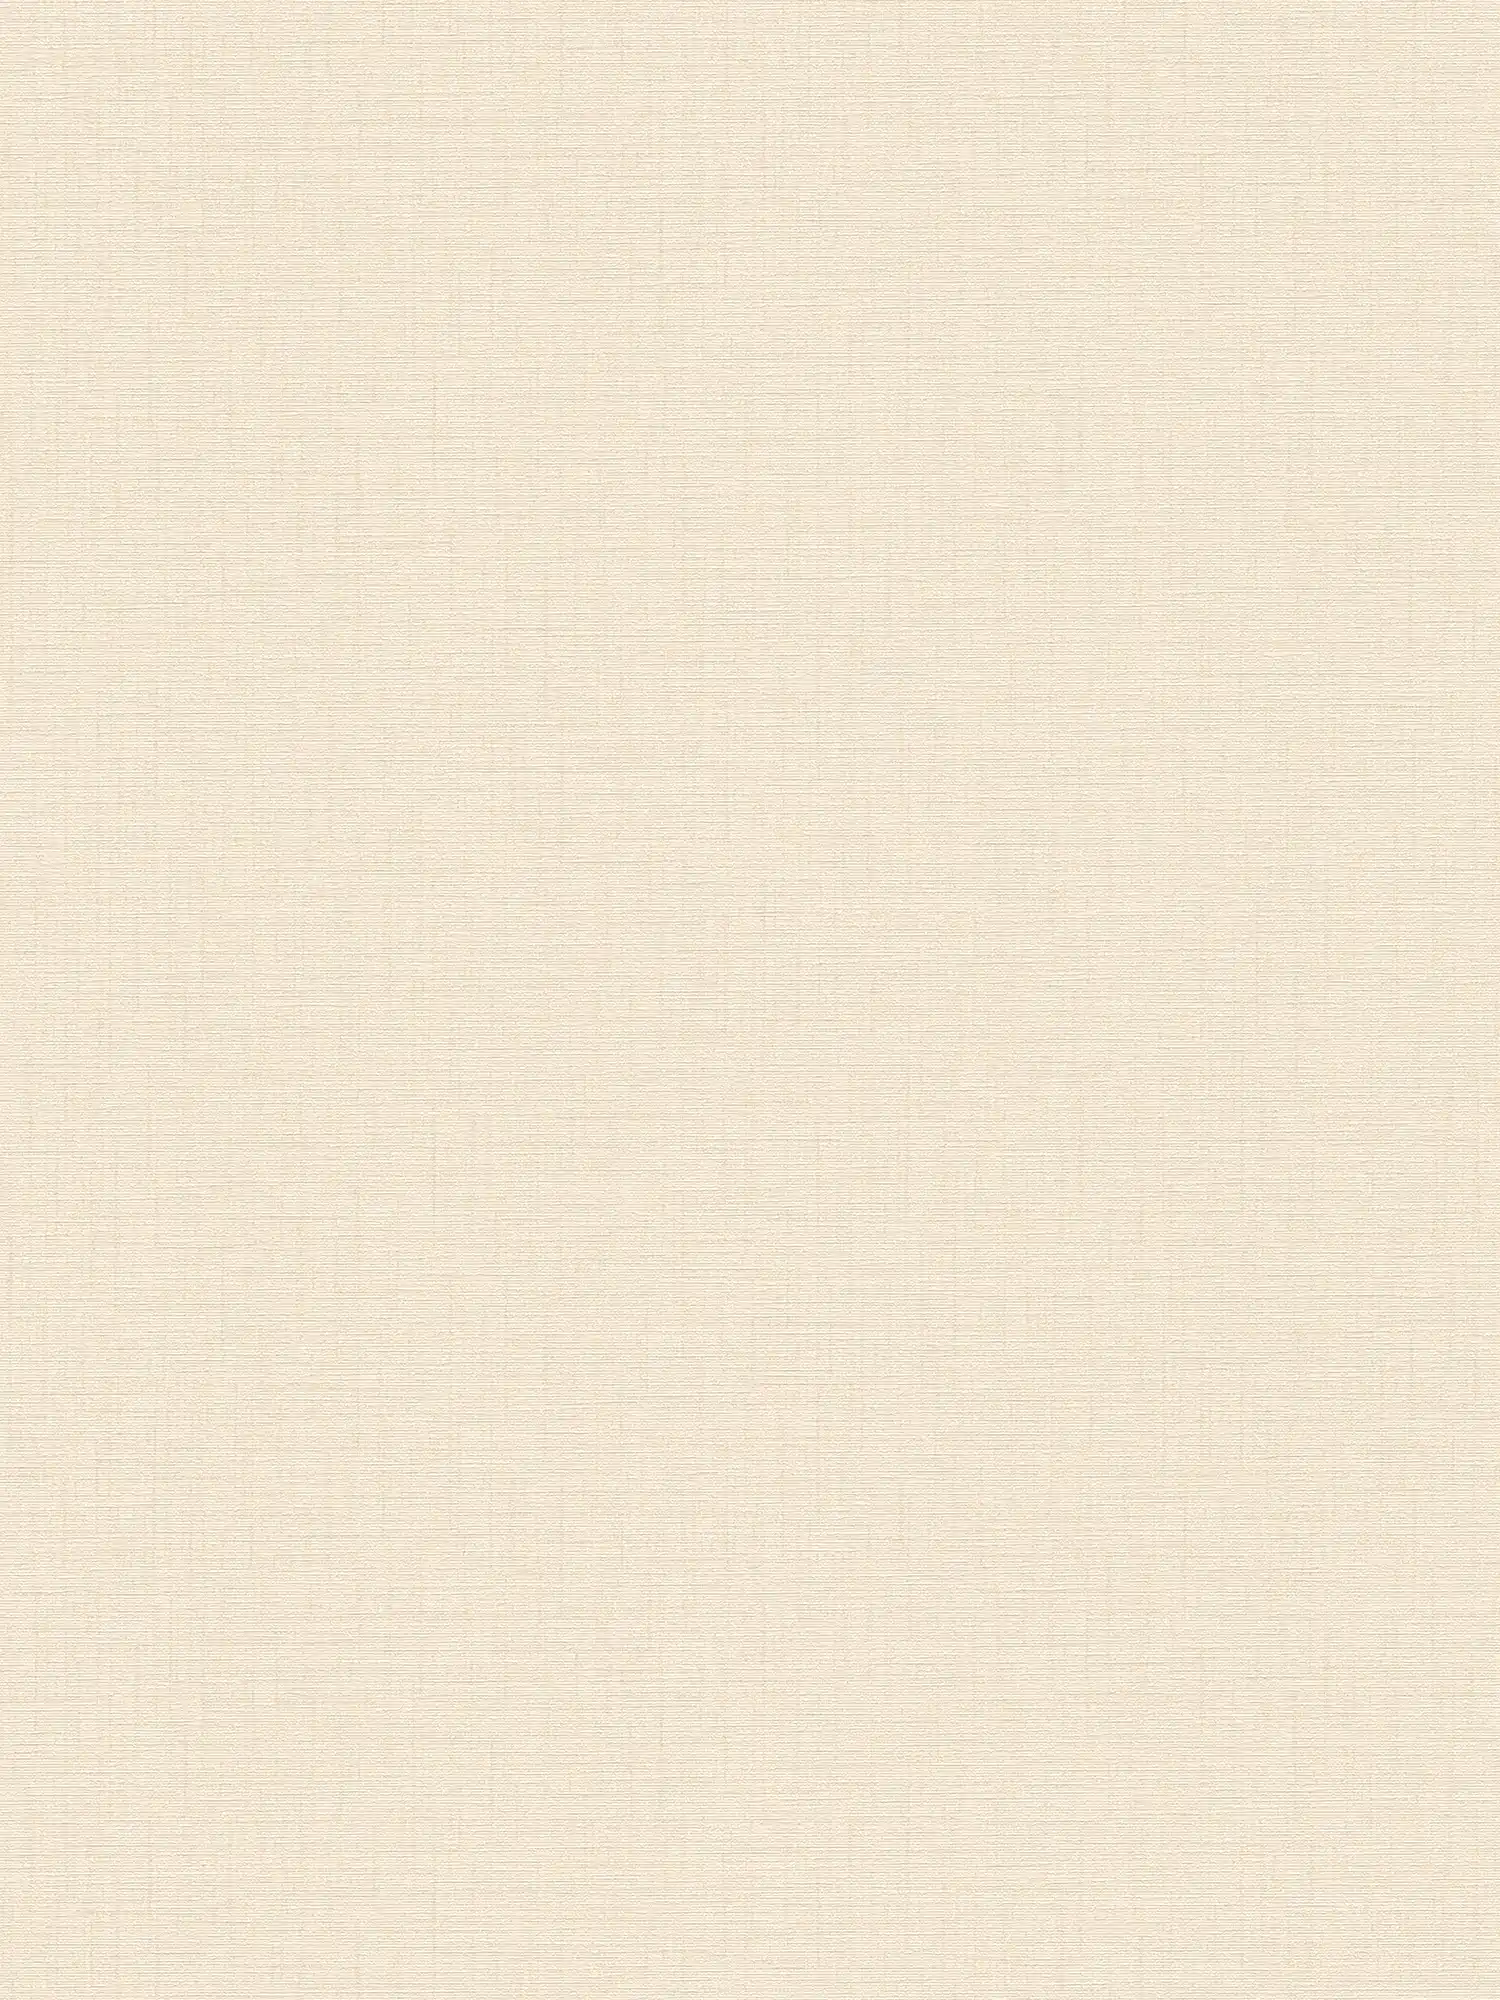 Ivory wallpaper non-woven with texture effect - cream
